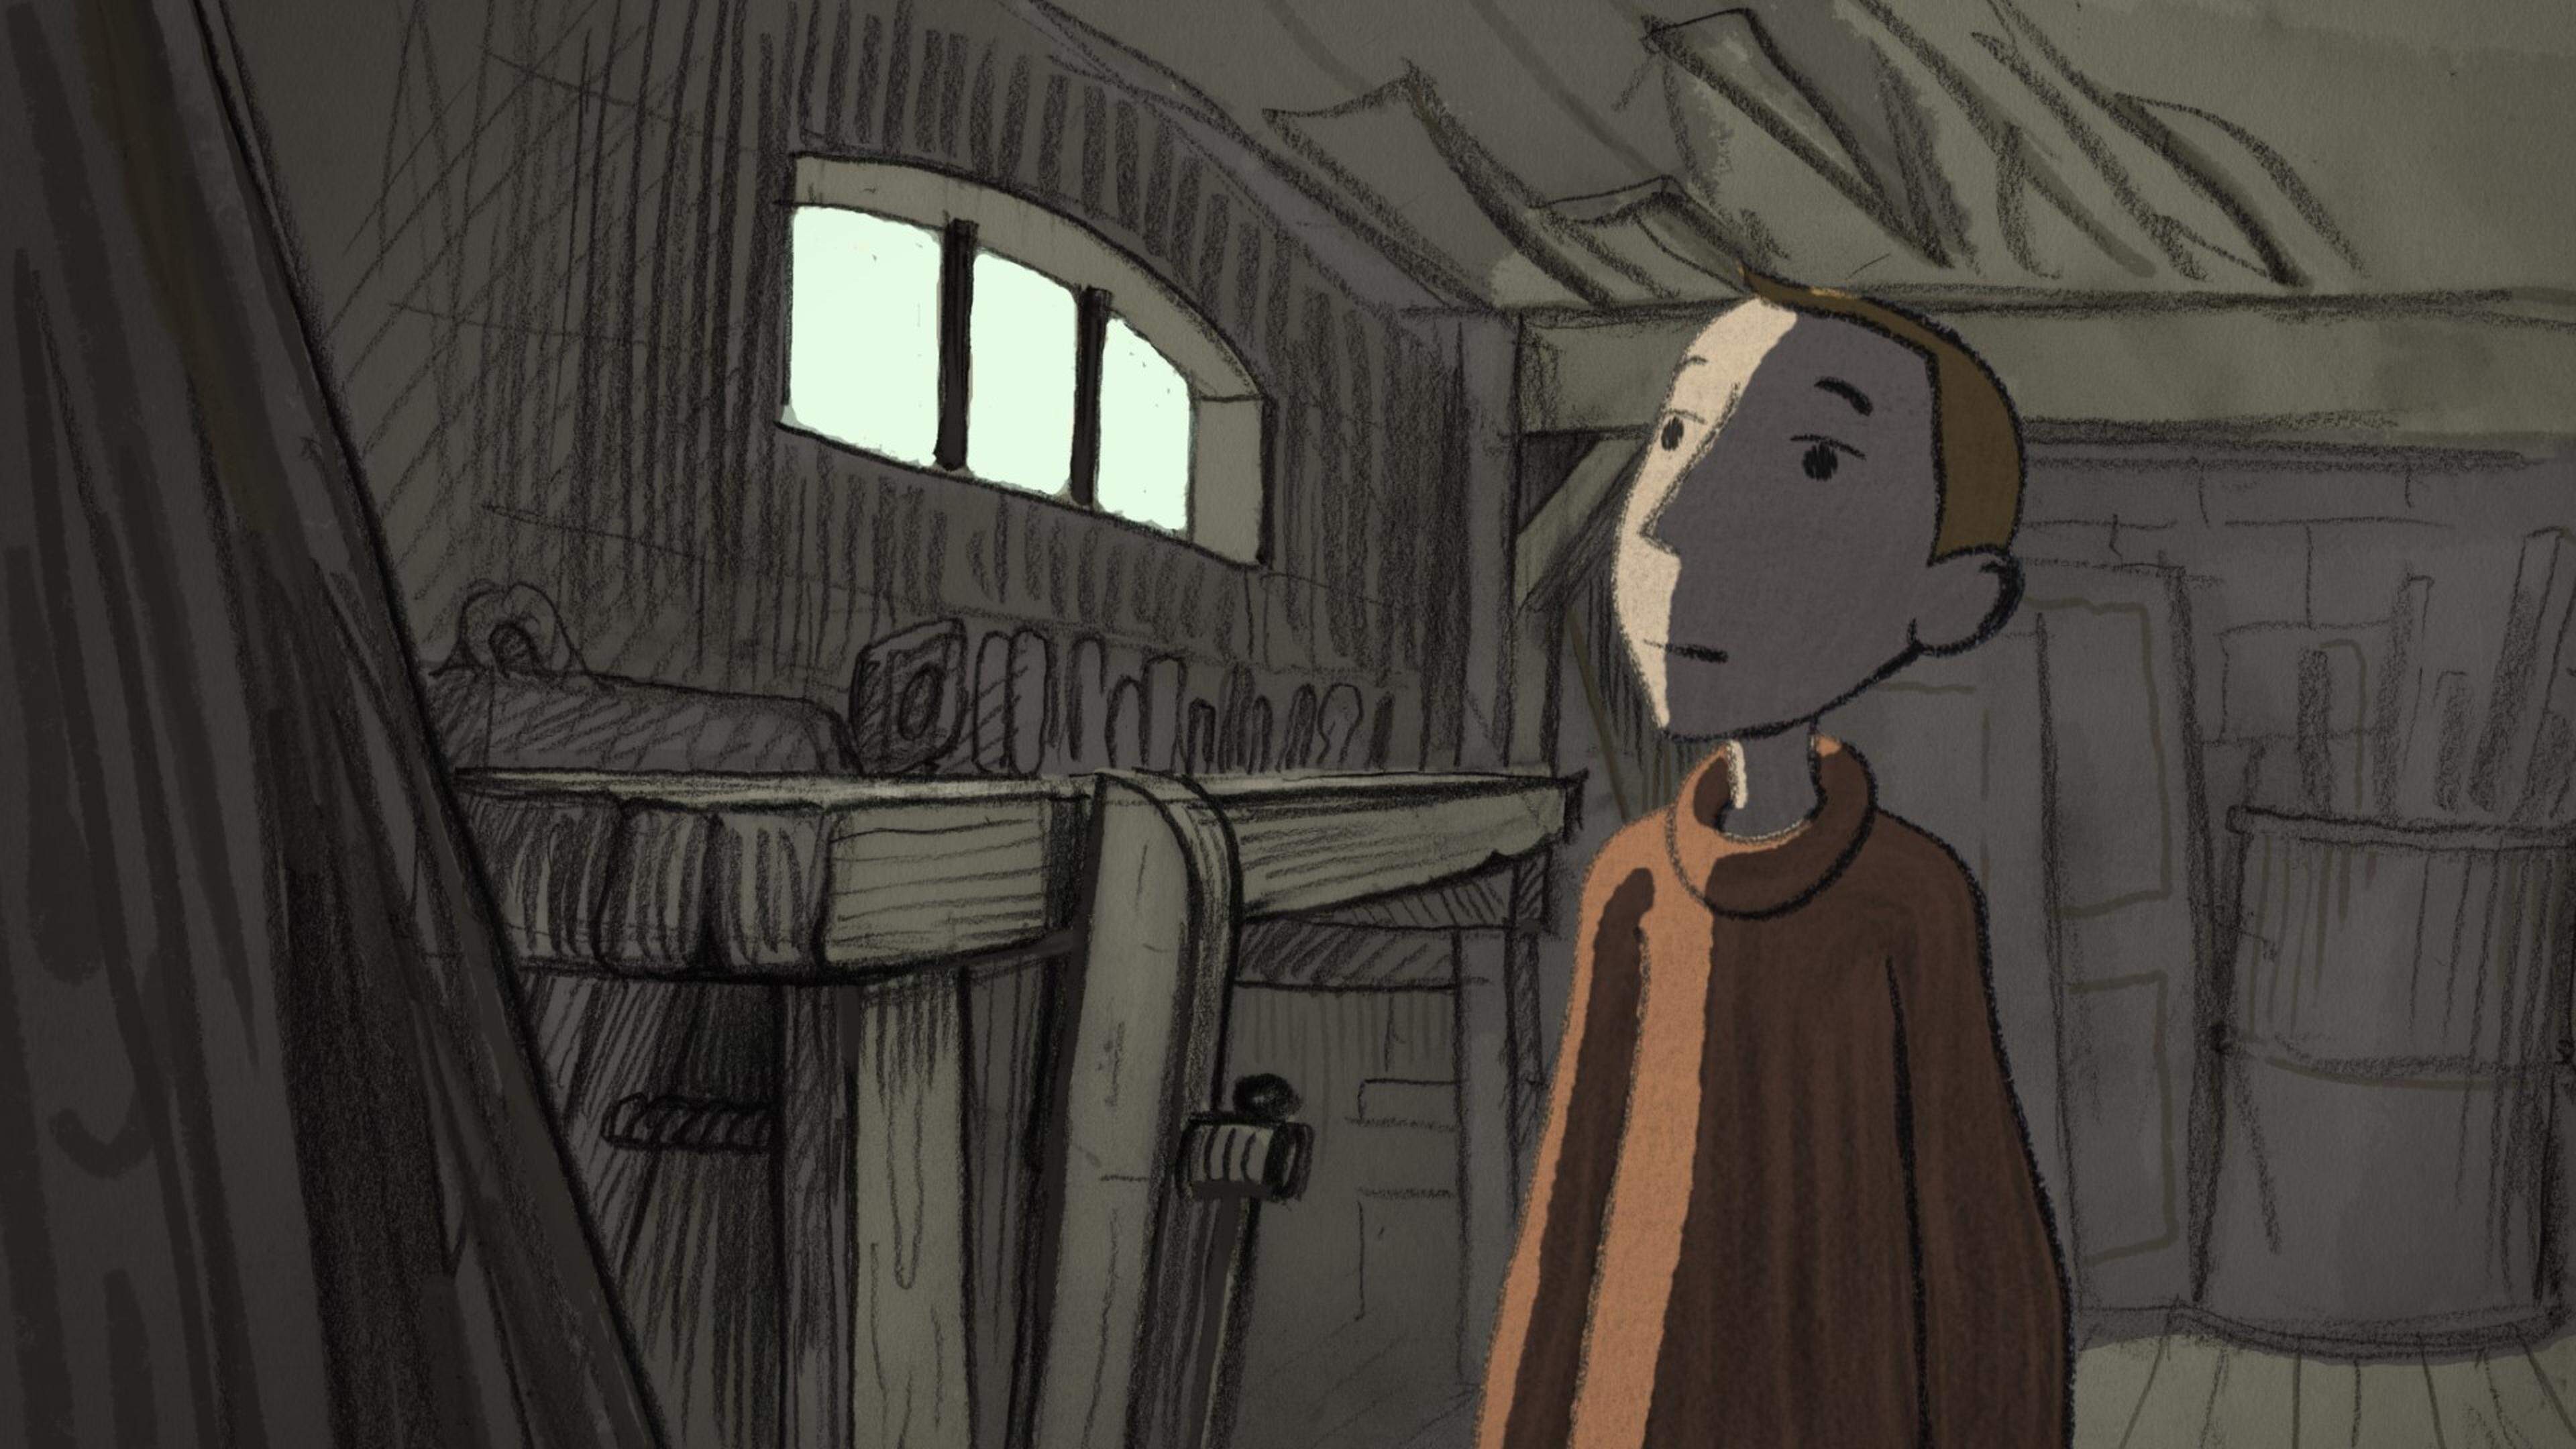 ‘Slocum’, directed by acclaimed French animator Jean-François Laguionie and co-produced by Mélusine Productions, has been chosen for the official feature film competition at this year’s Annecy International Animation Film Festival